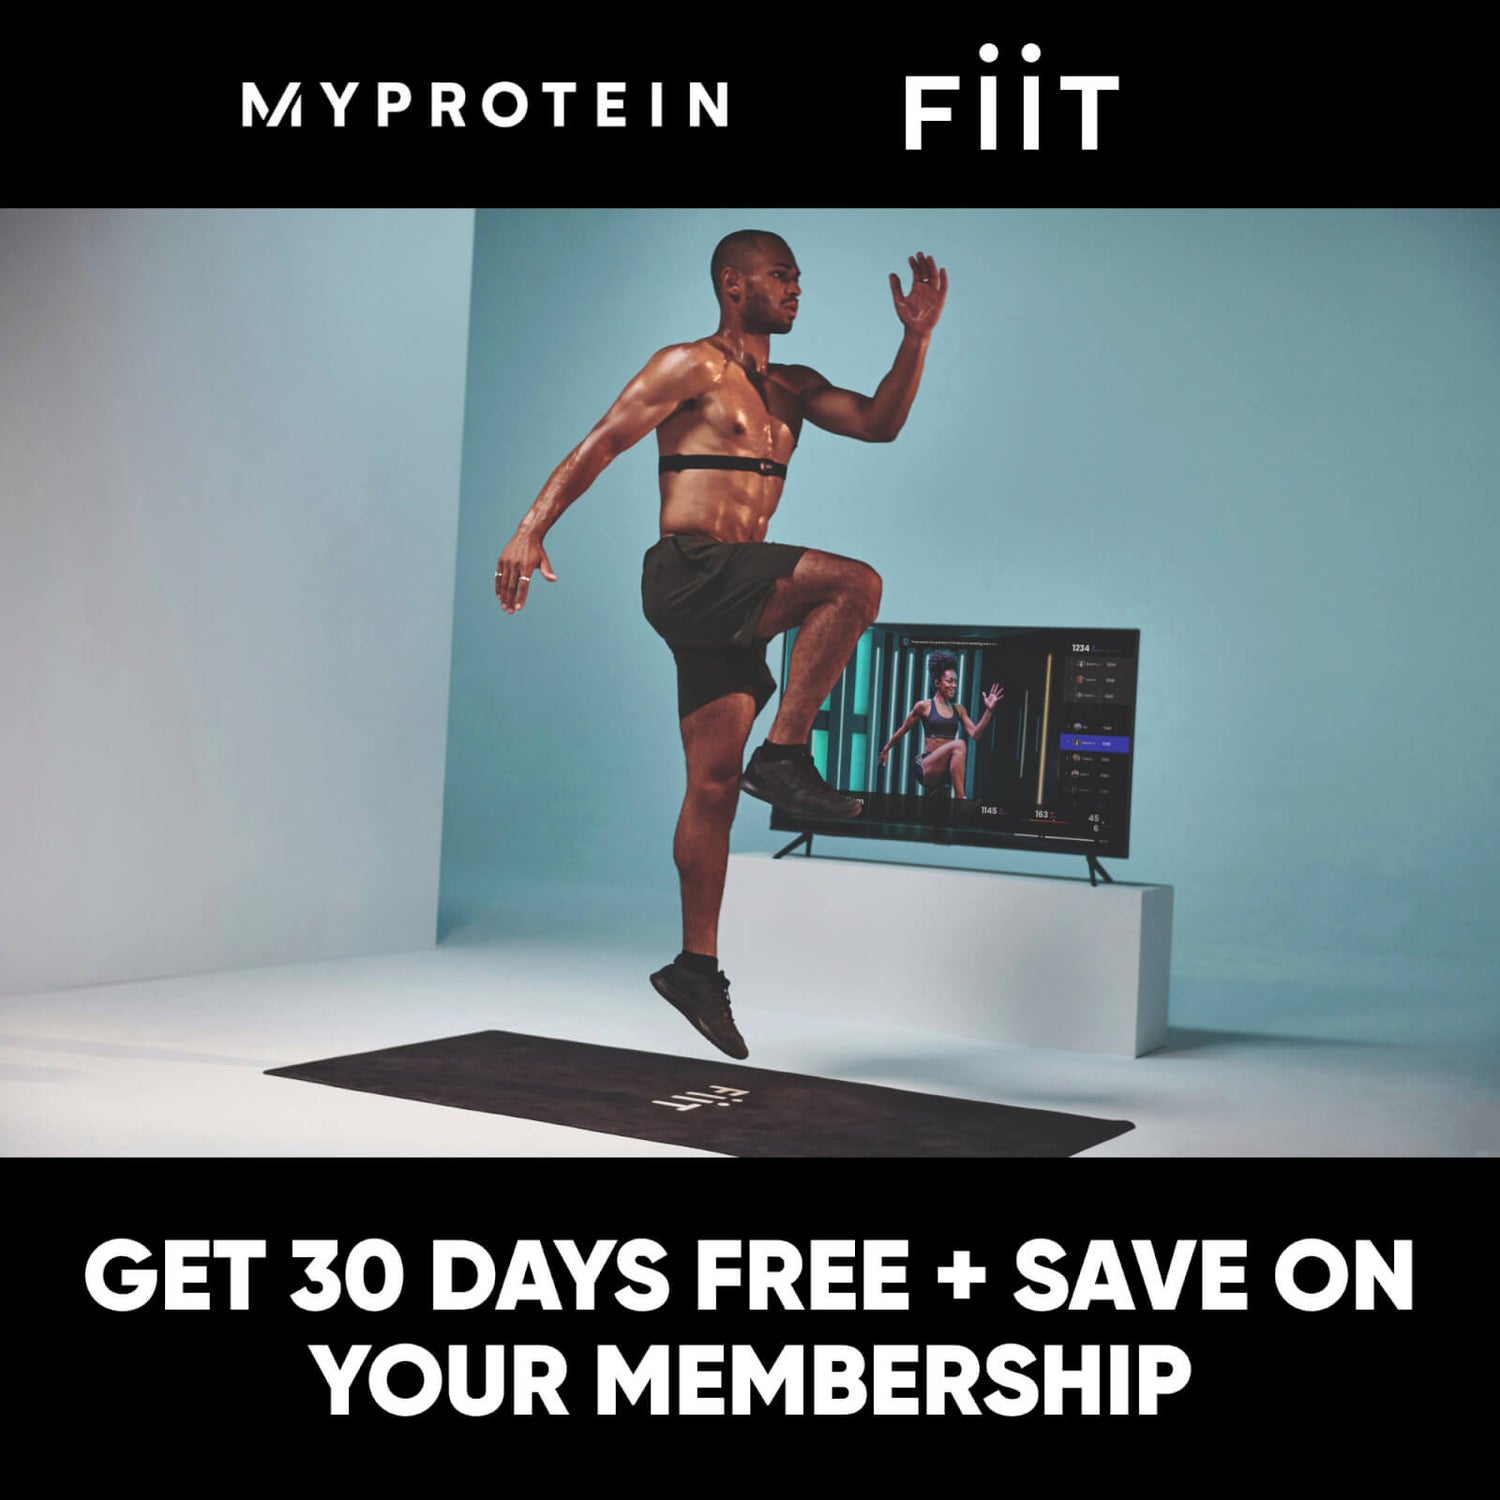 Fiit - One month free + 25% off